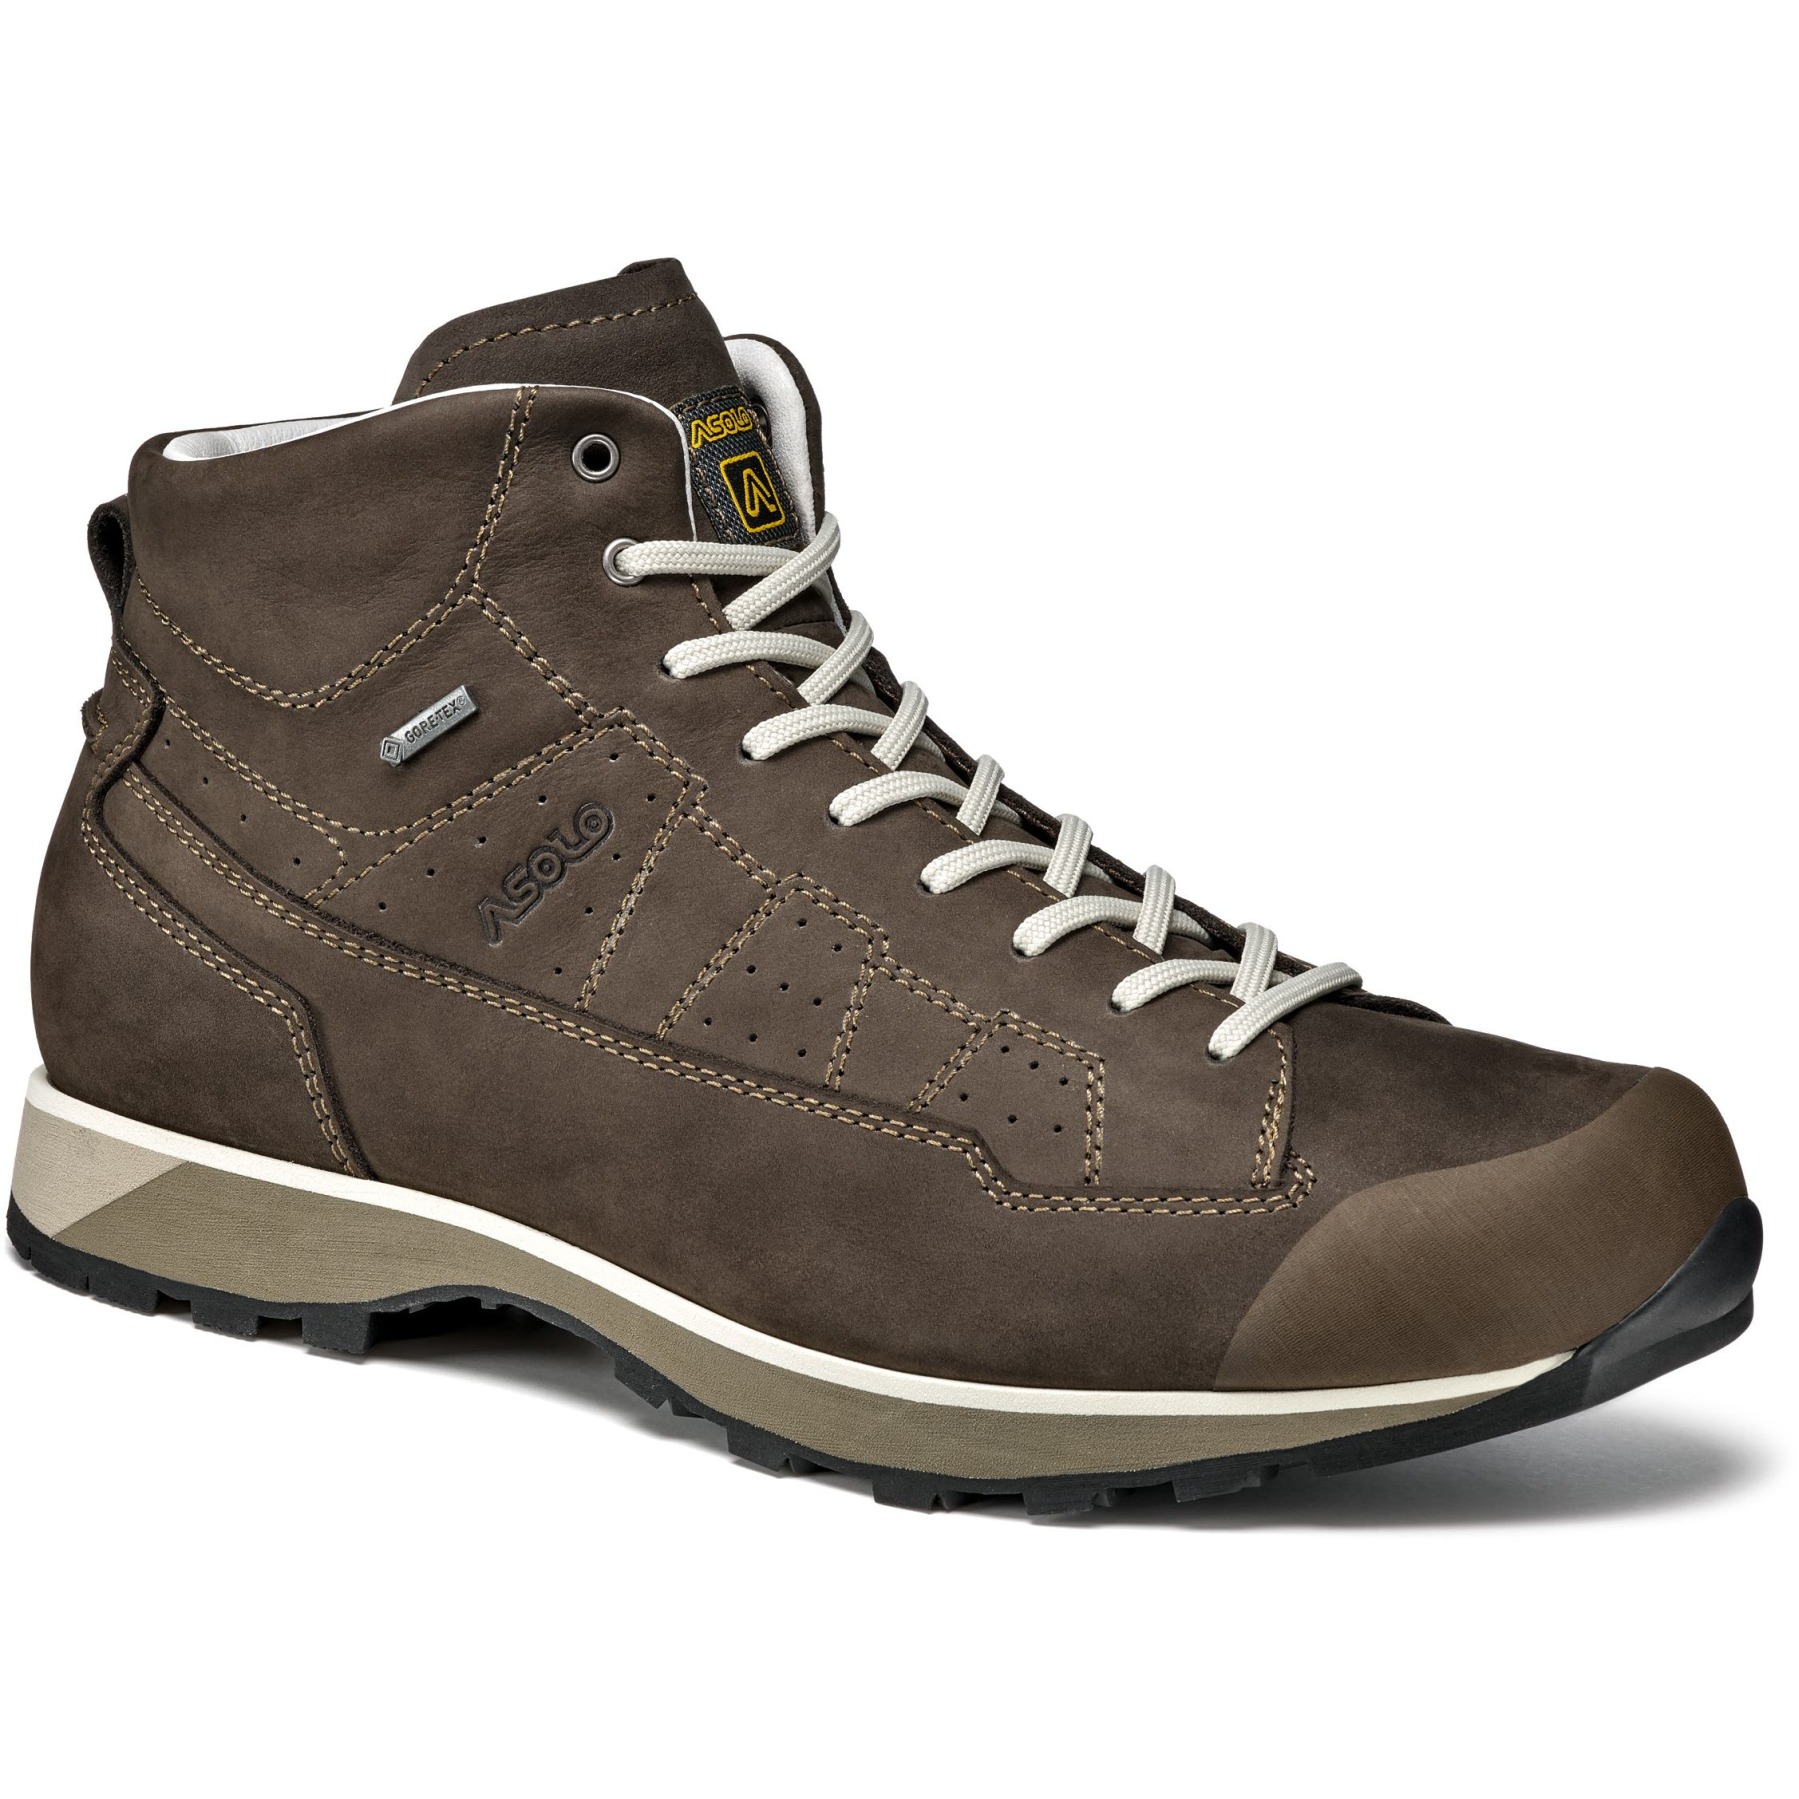 Picture of Asolo Active GV MM Shoe - Dark Brown